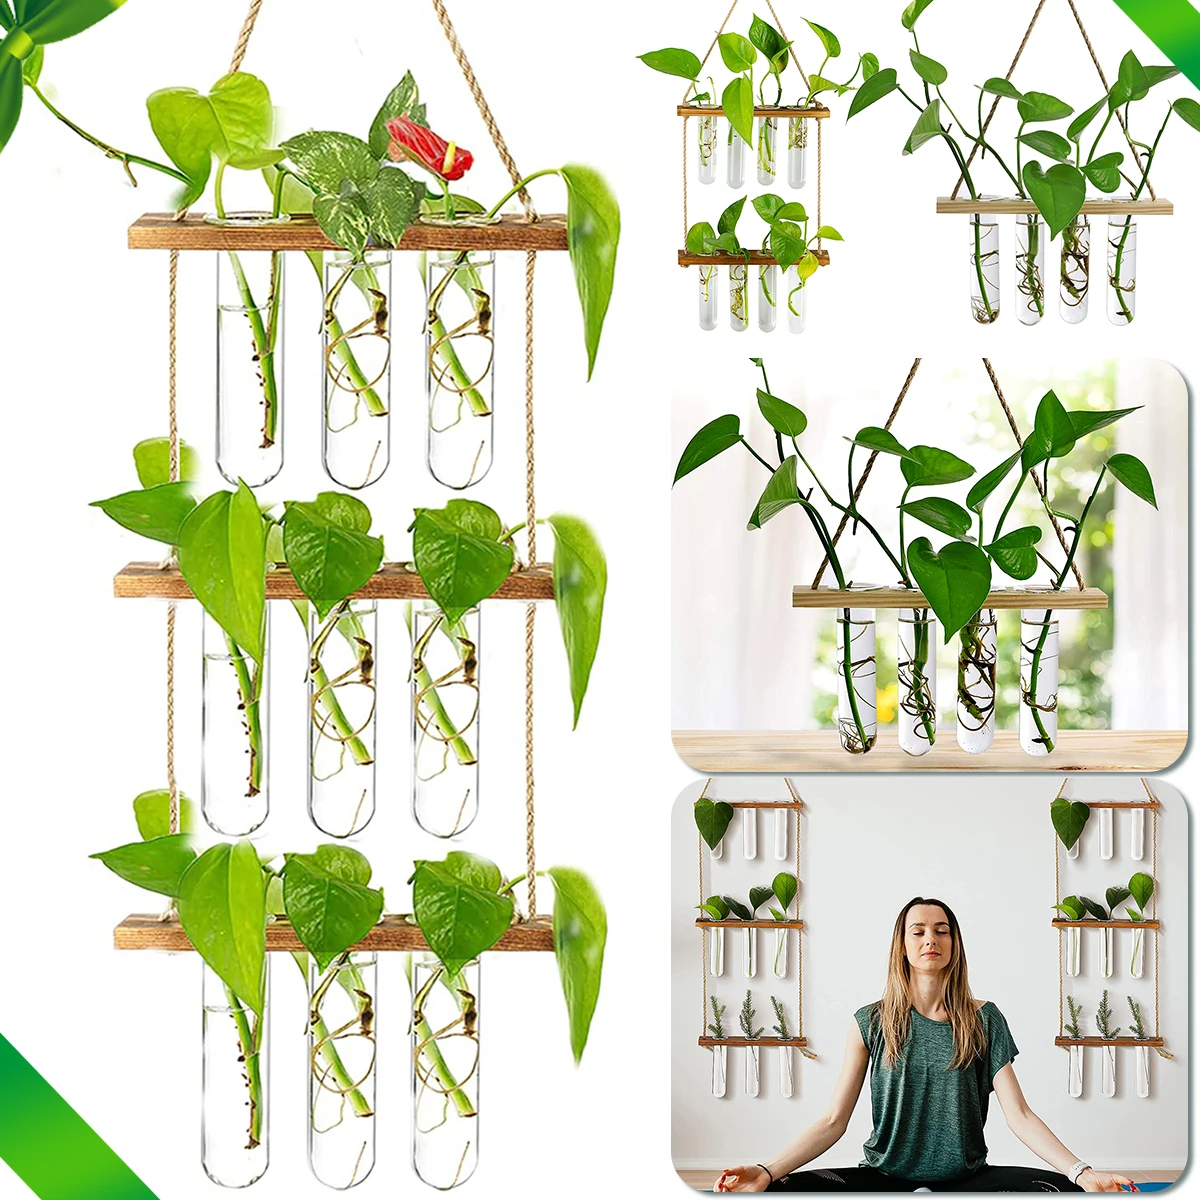 Ins Wall Hanging Glass Planter Terrarium Container Flower Bud Vase with Wooden Test Tube Holder for Propagation Hydroponic Plant